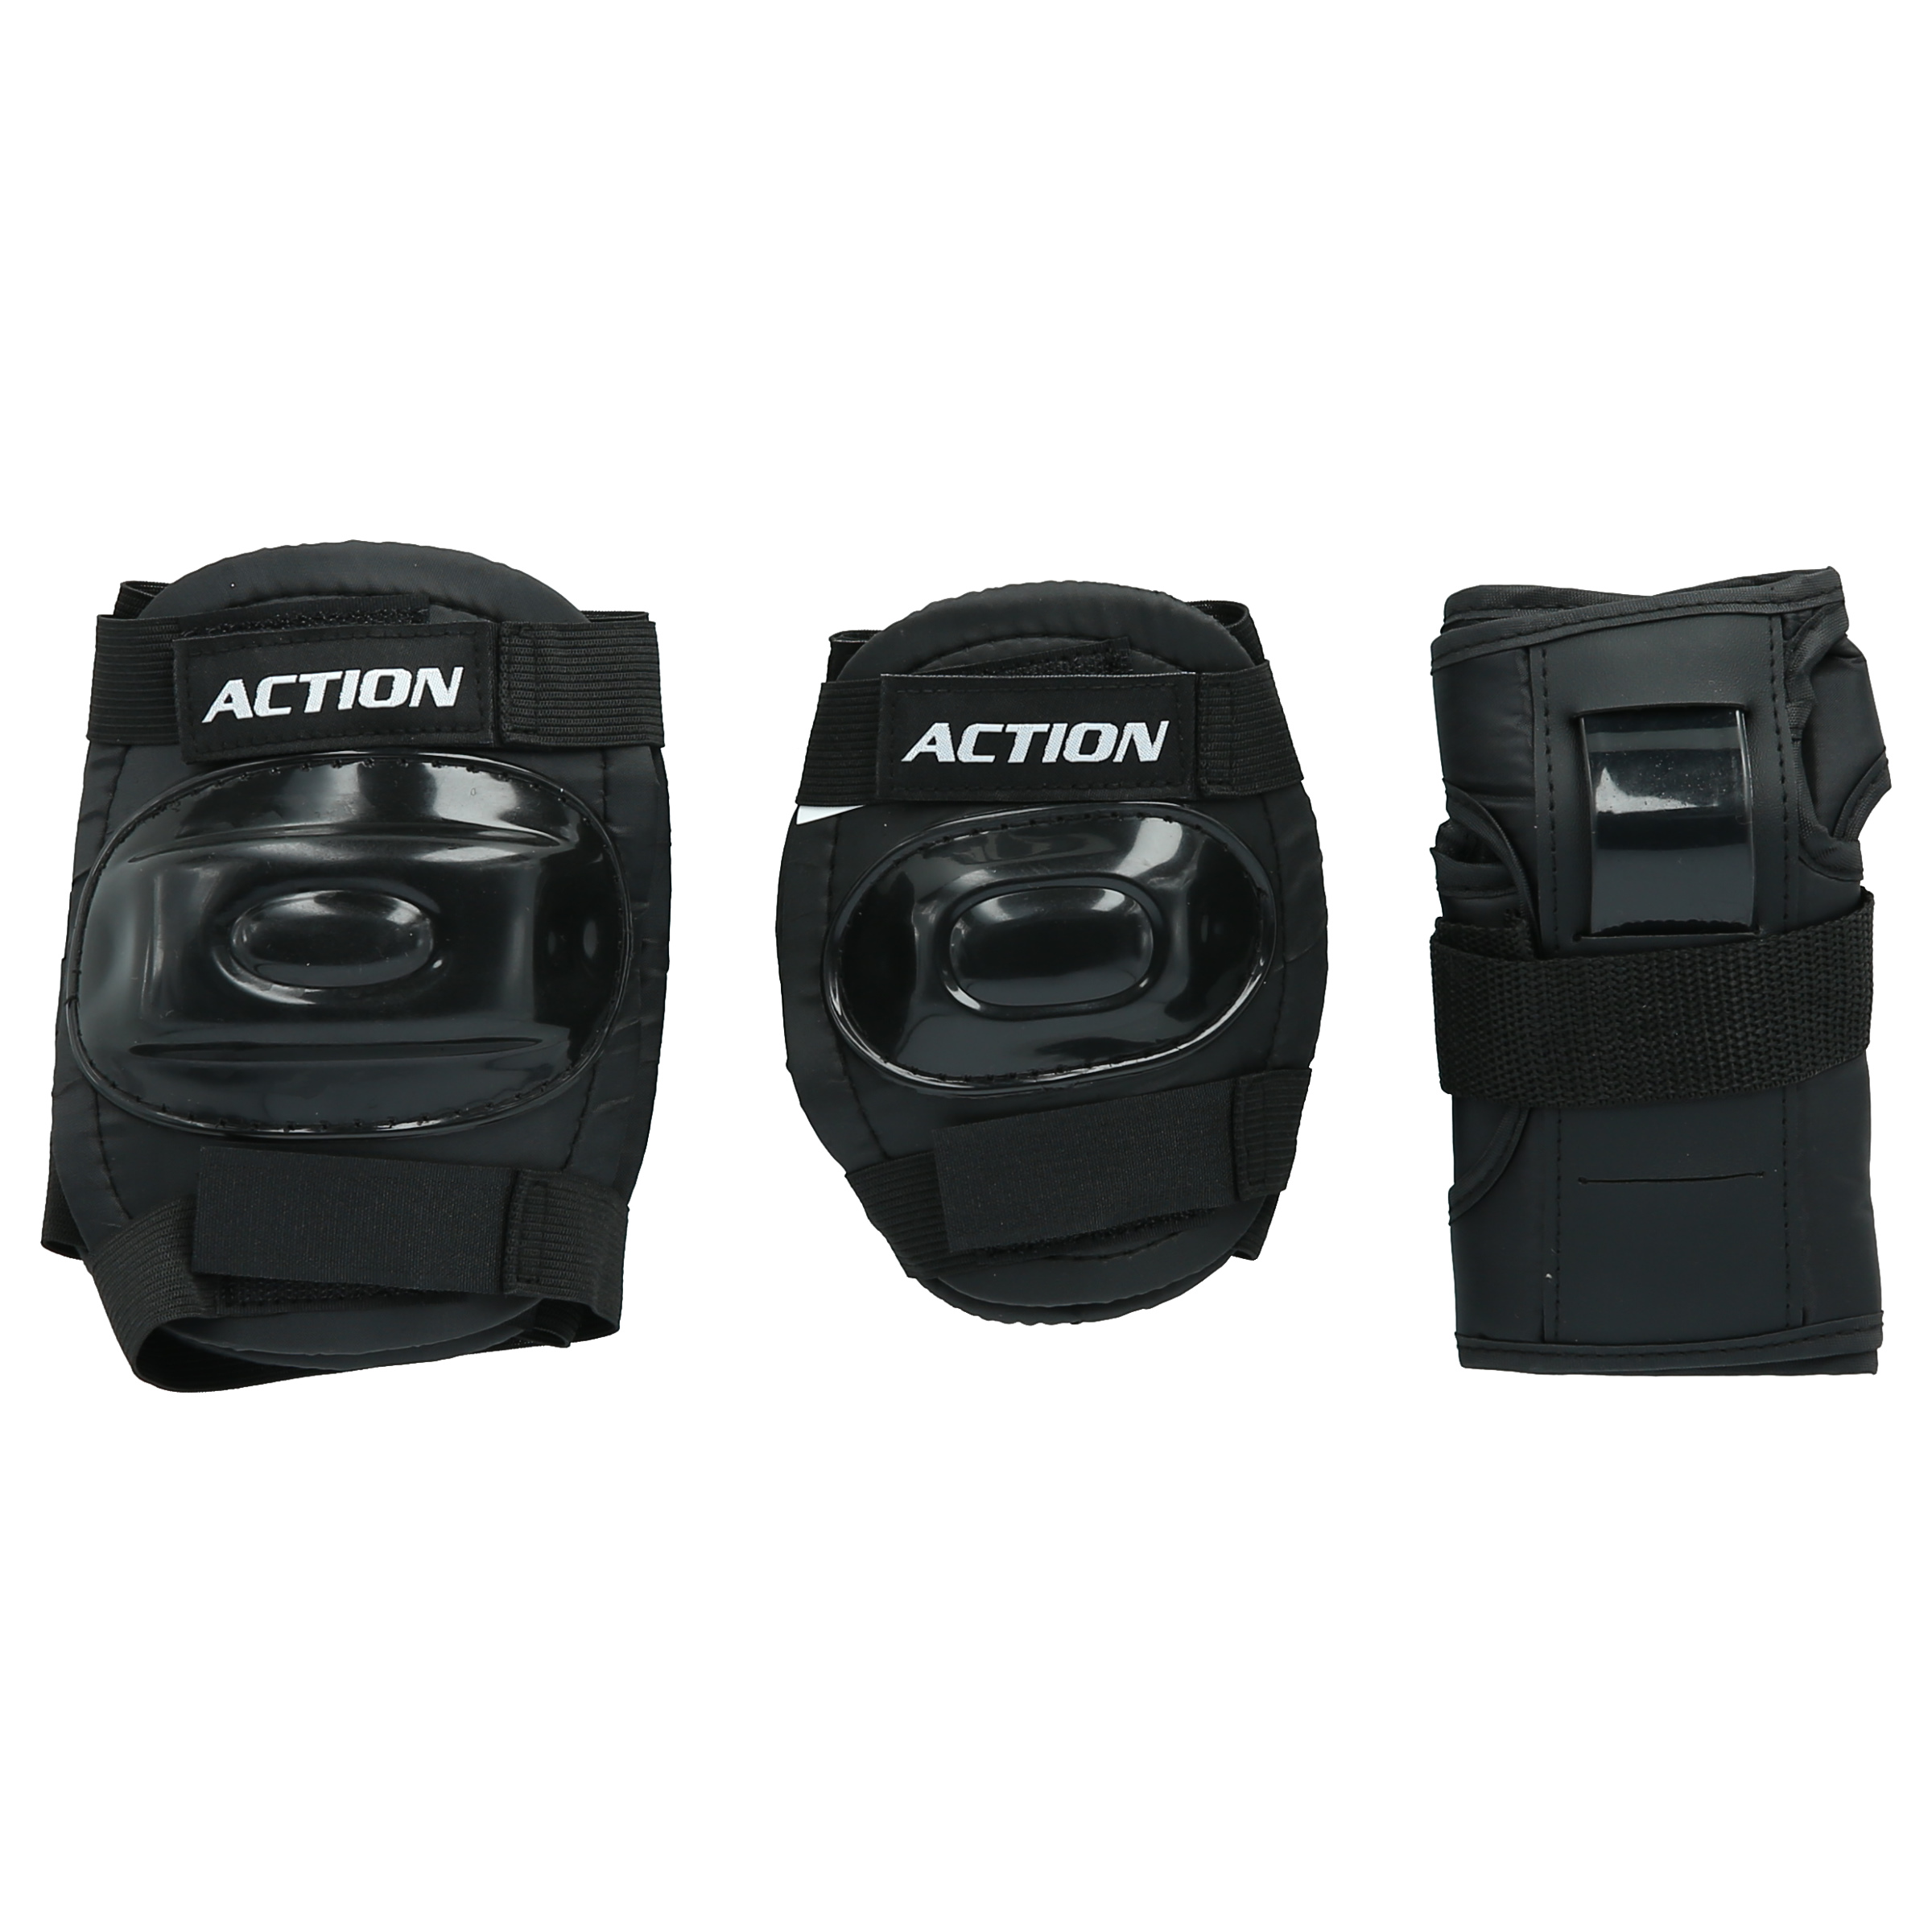 Action PROTECTOR 